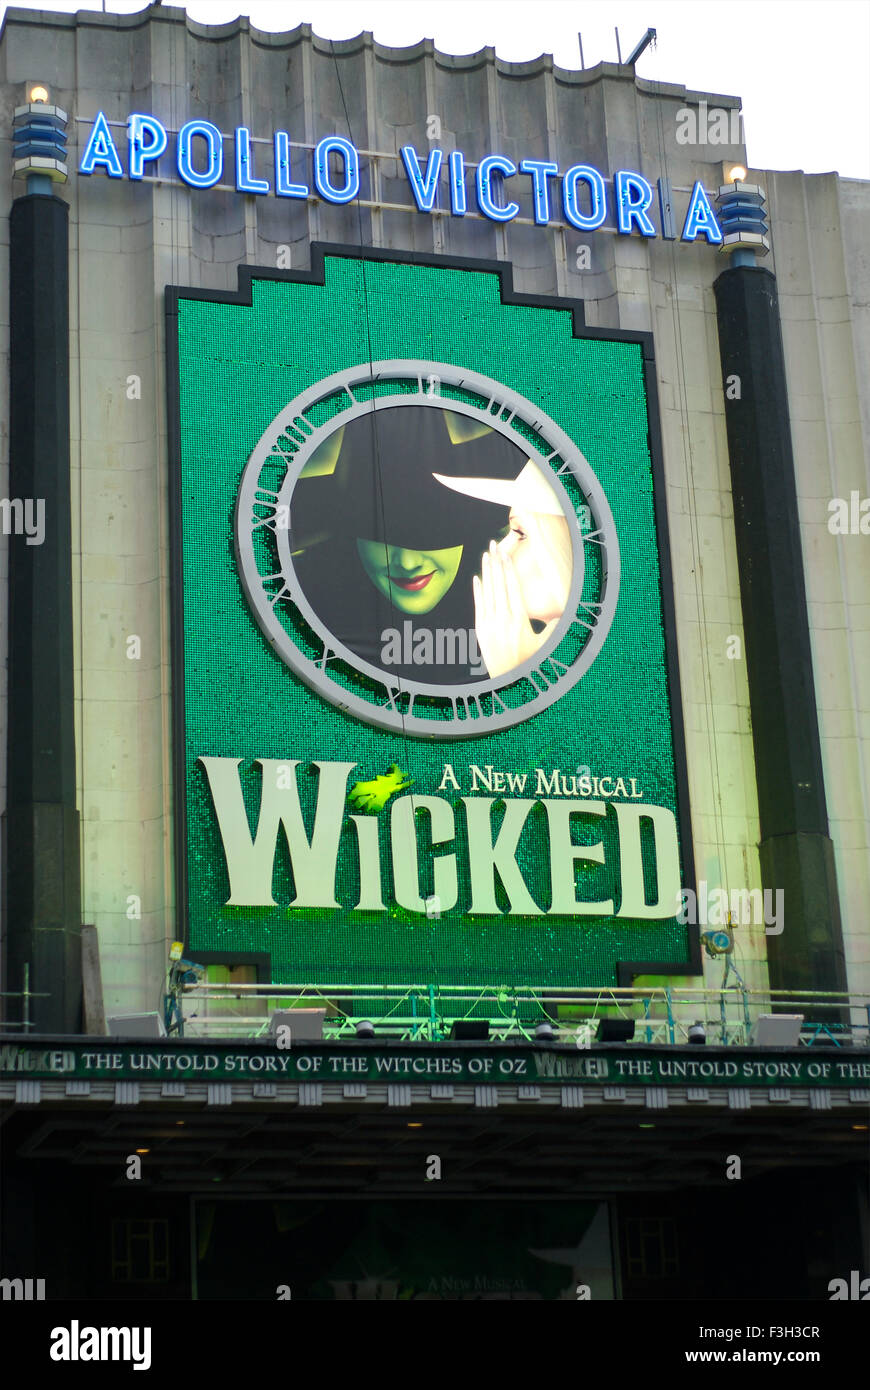 A new musical Wicked, Apollo Victoria Theatre, West End theatre, Wilton Road, Westminster, Victoria Station, London, England, United Kingdom, UK Stock Photo